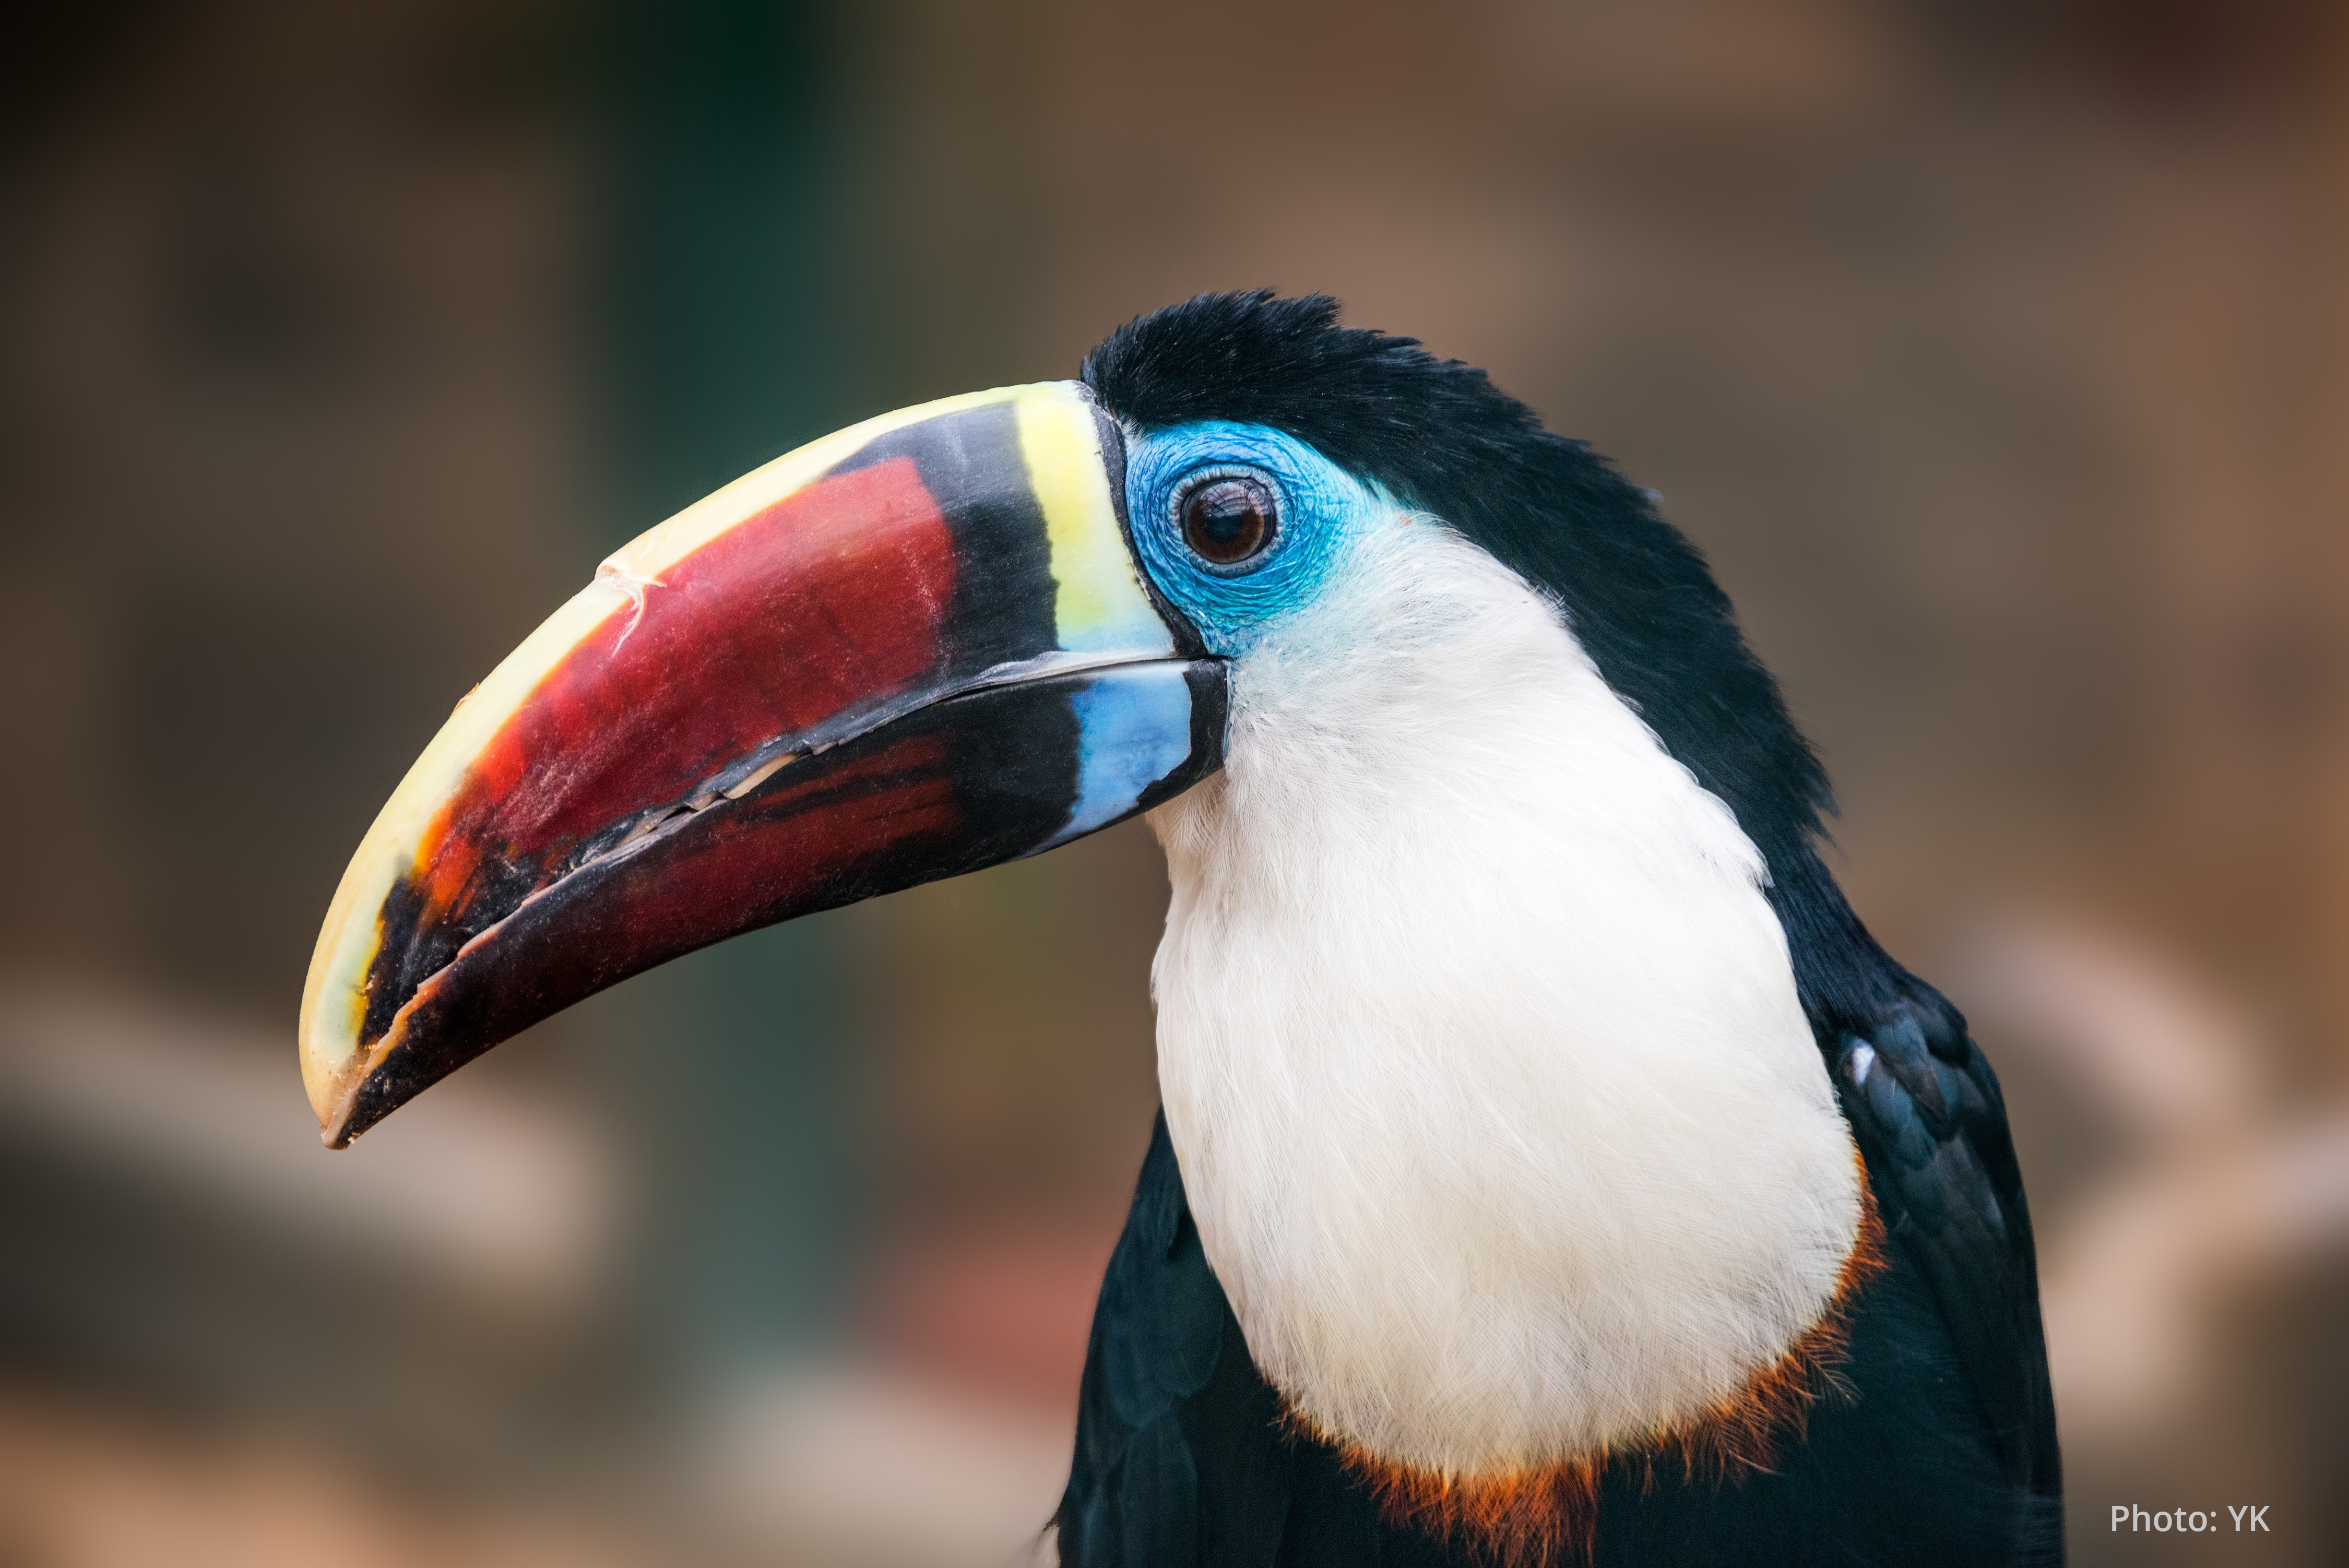 A white-throated toucan (Ramphastos tucanus) close up in a zoo